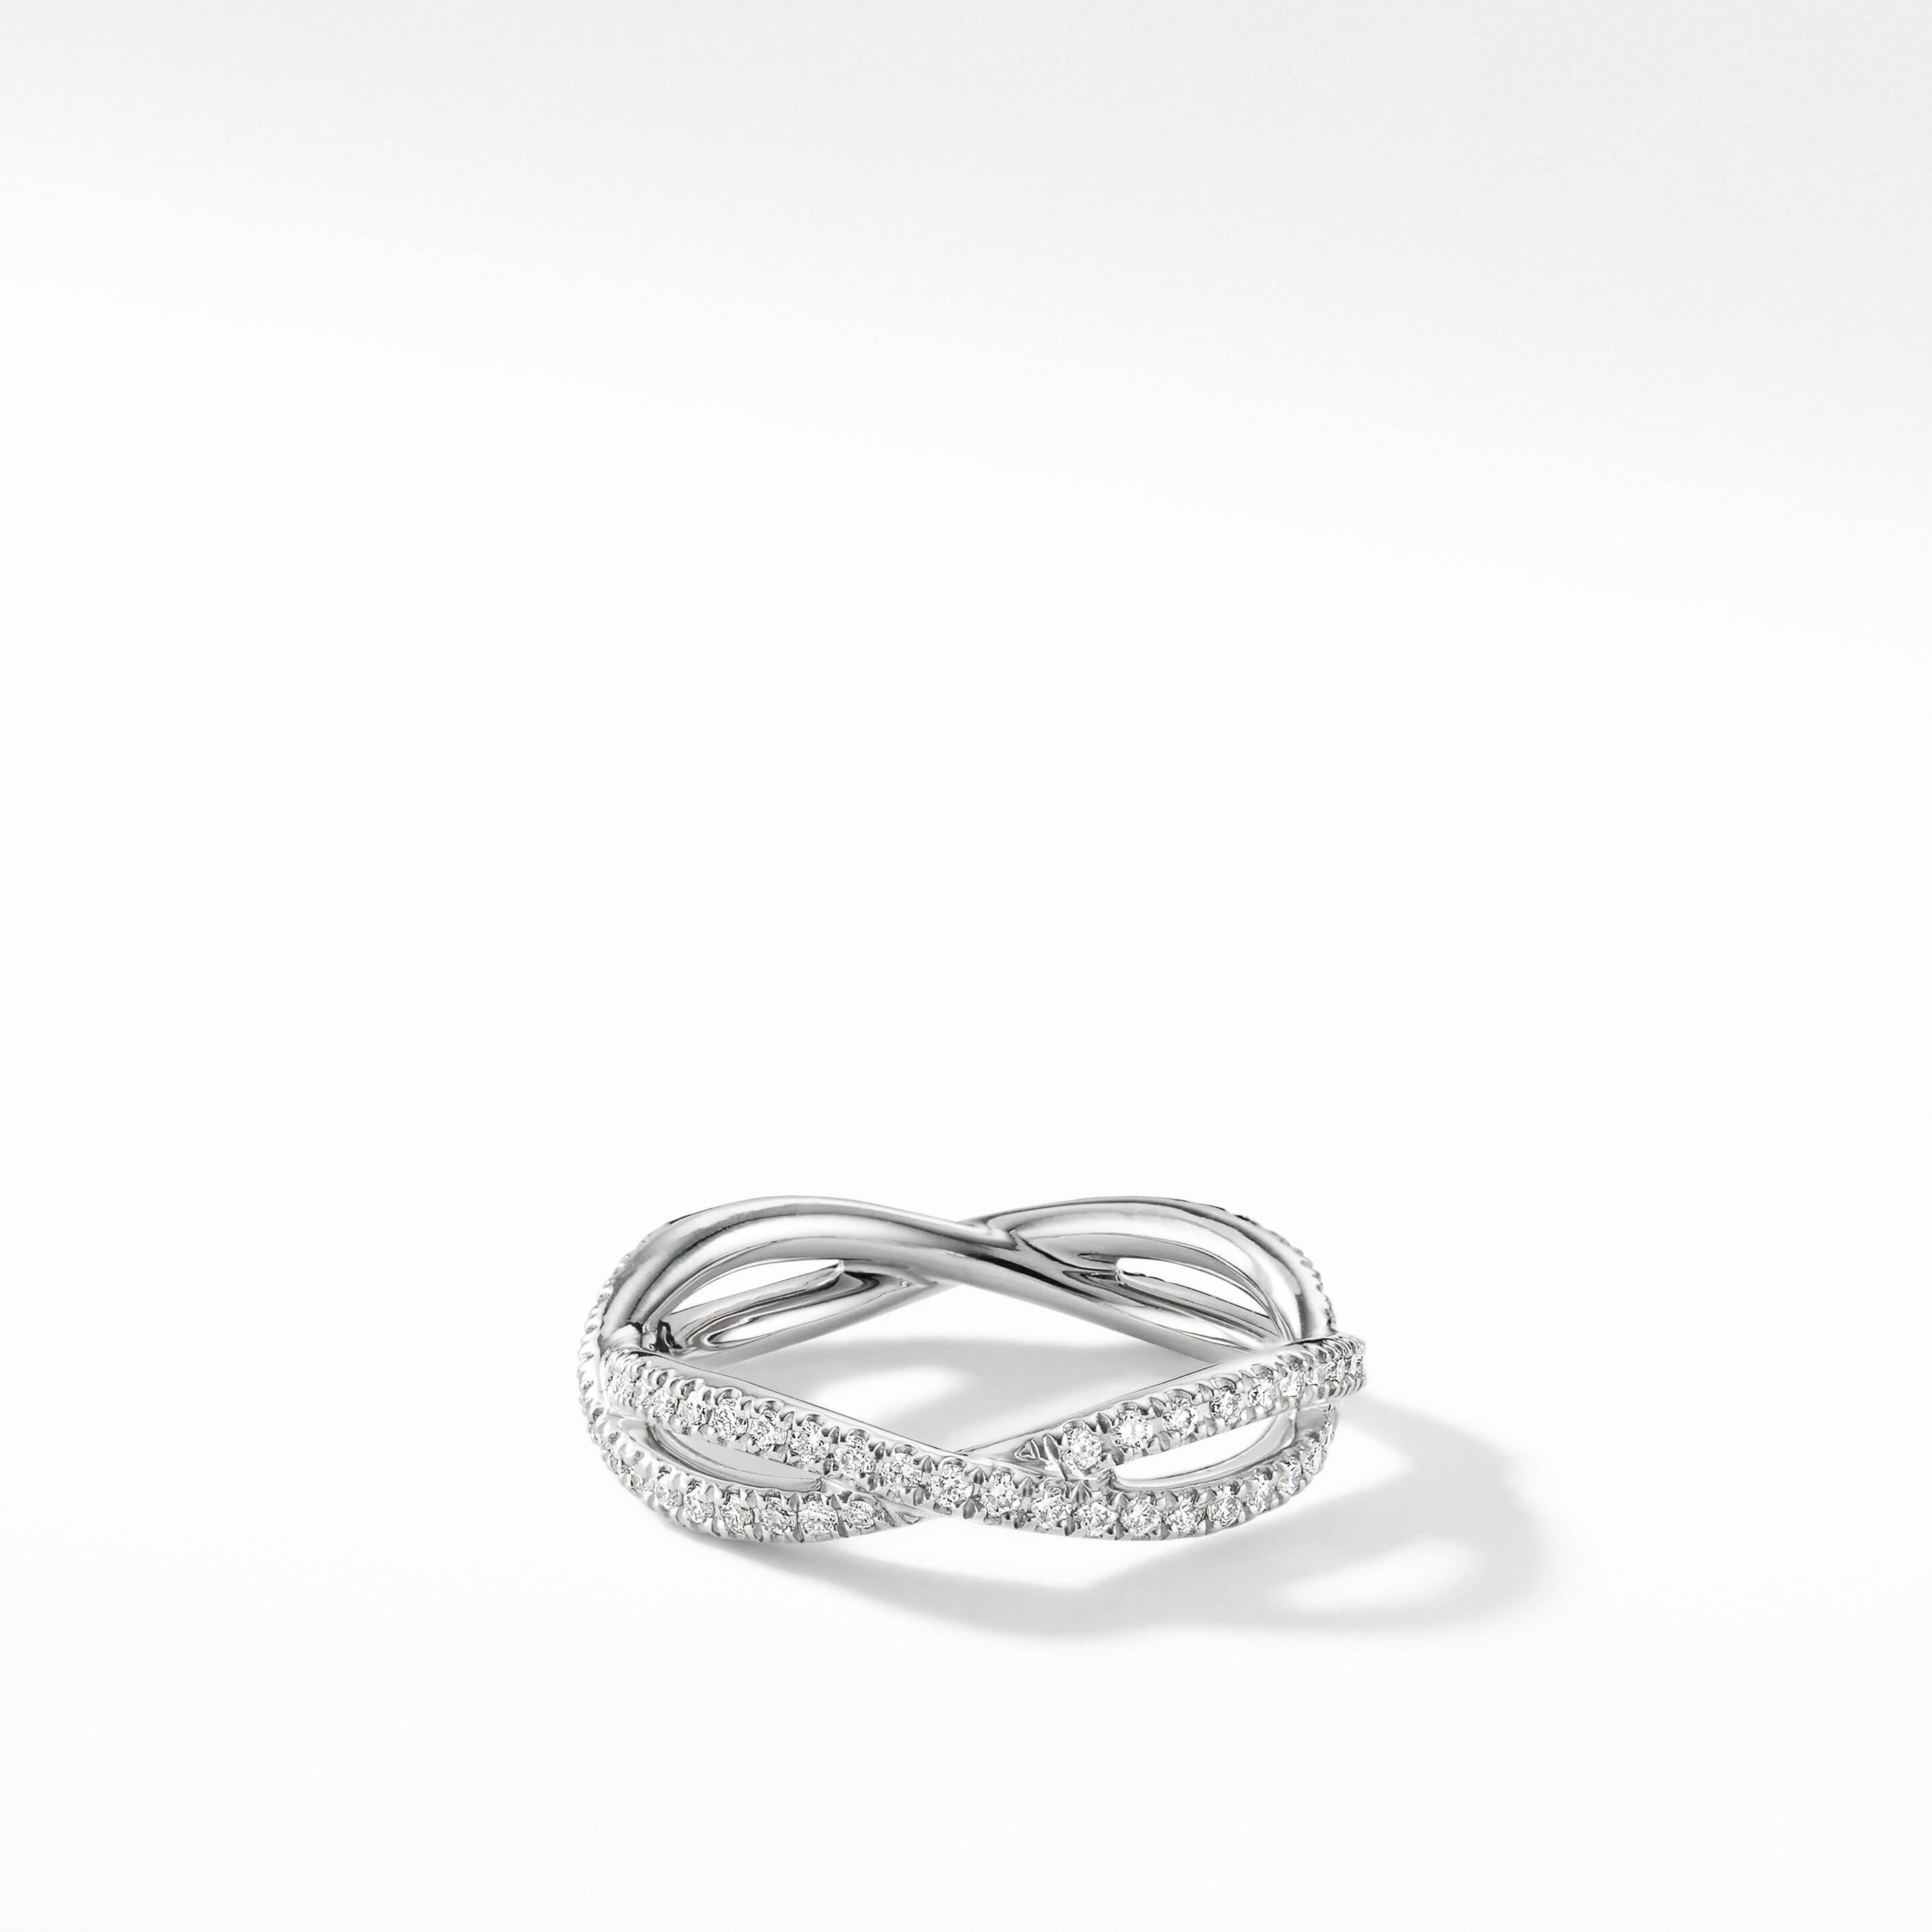 DY Lanai Band Ring in Platinum with Full Pavé Diamonds